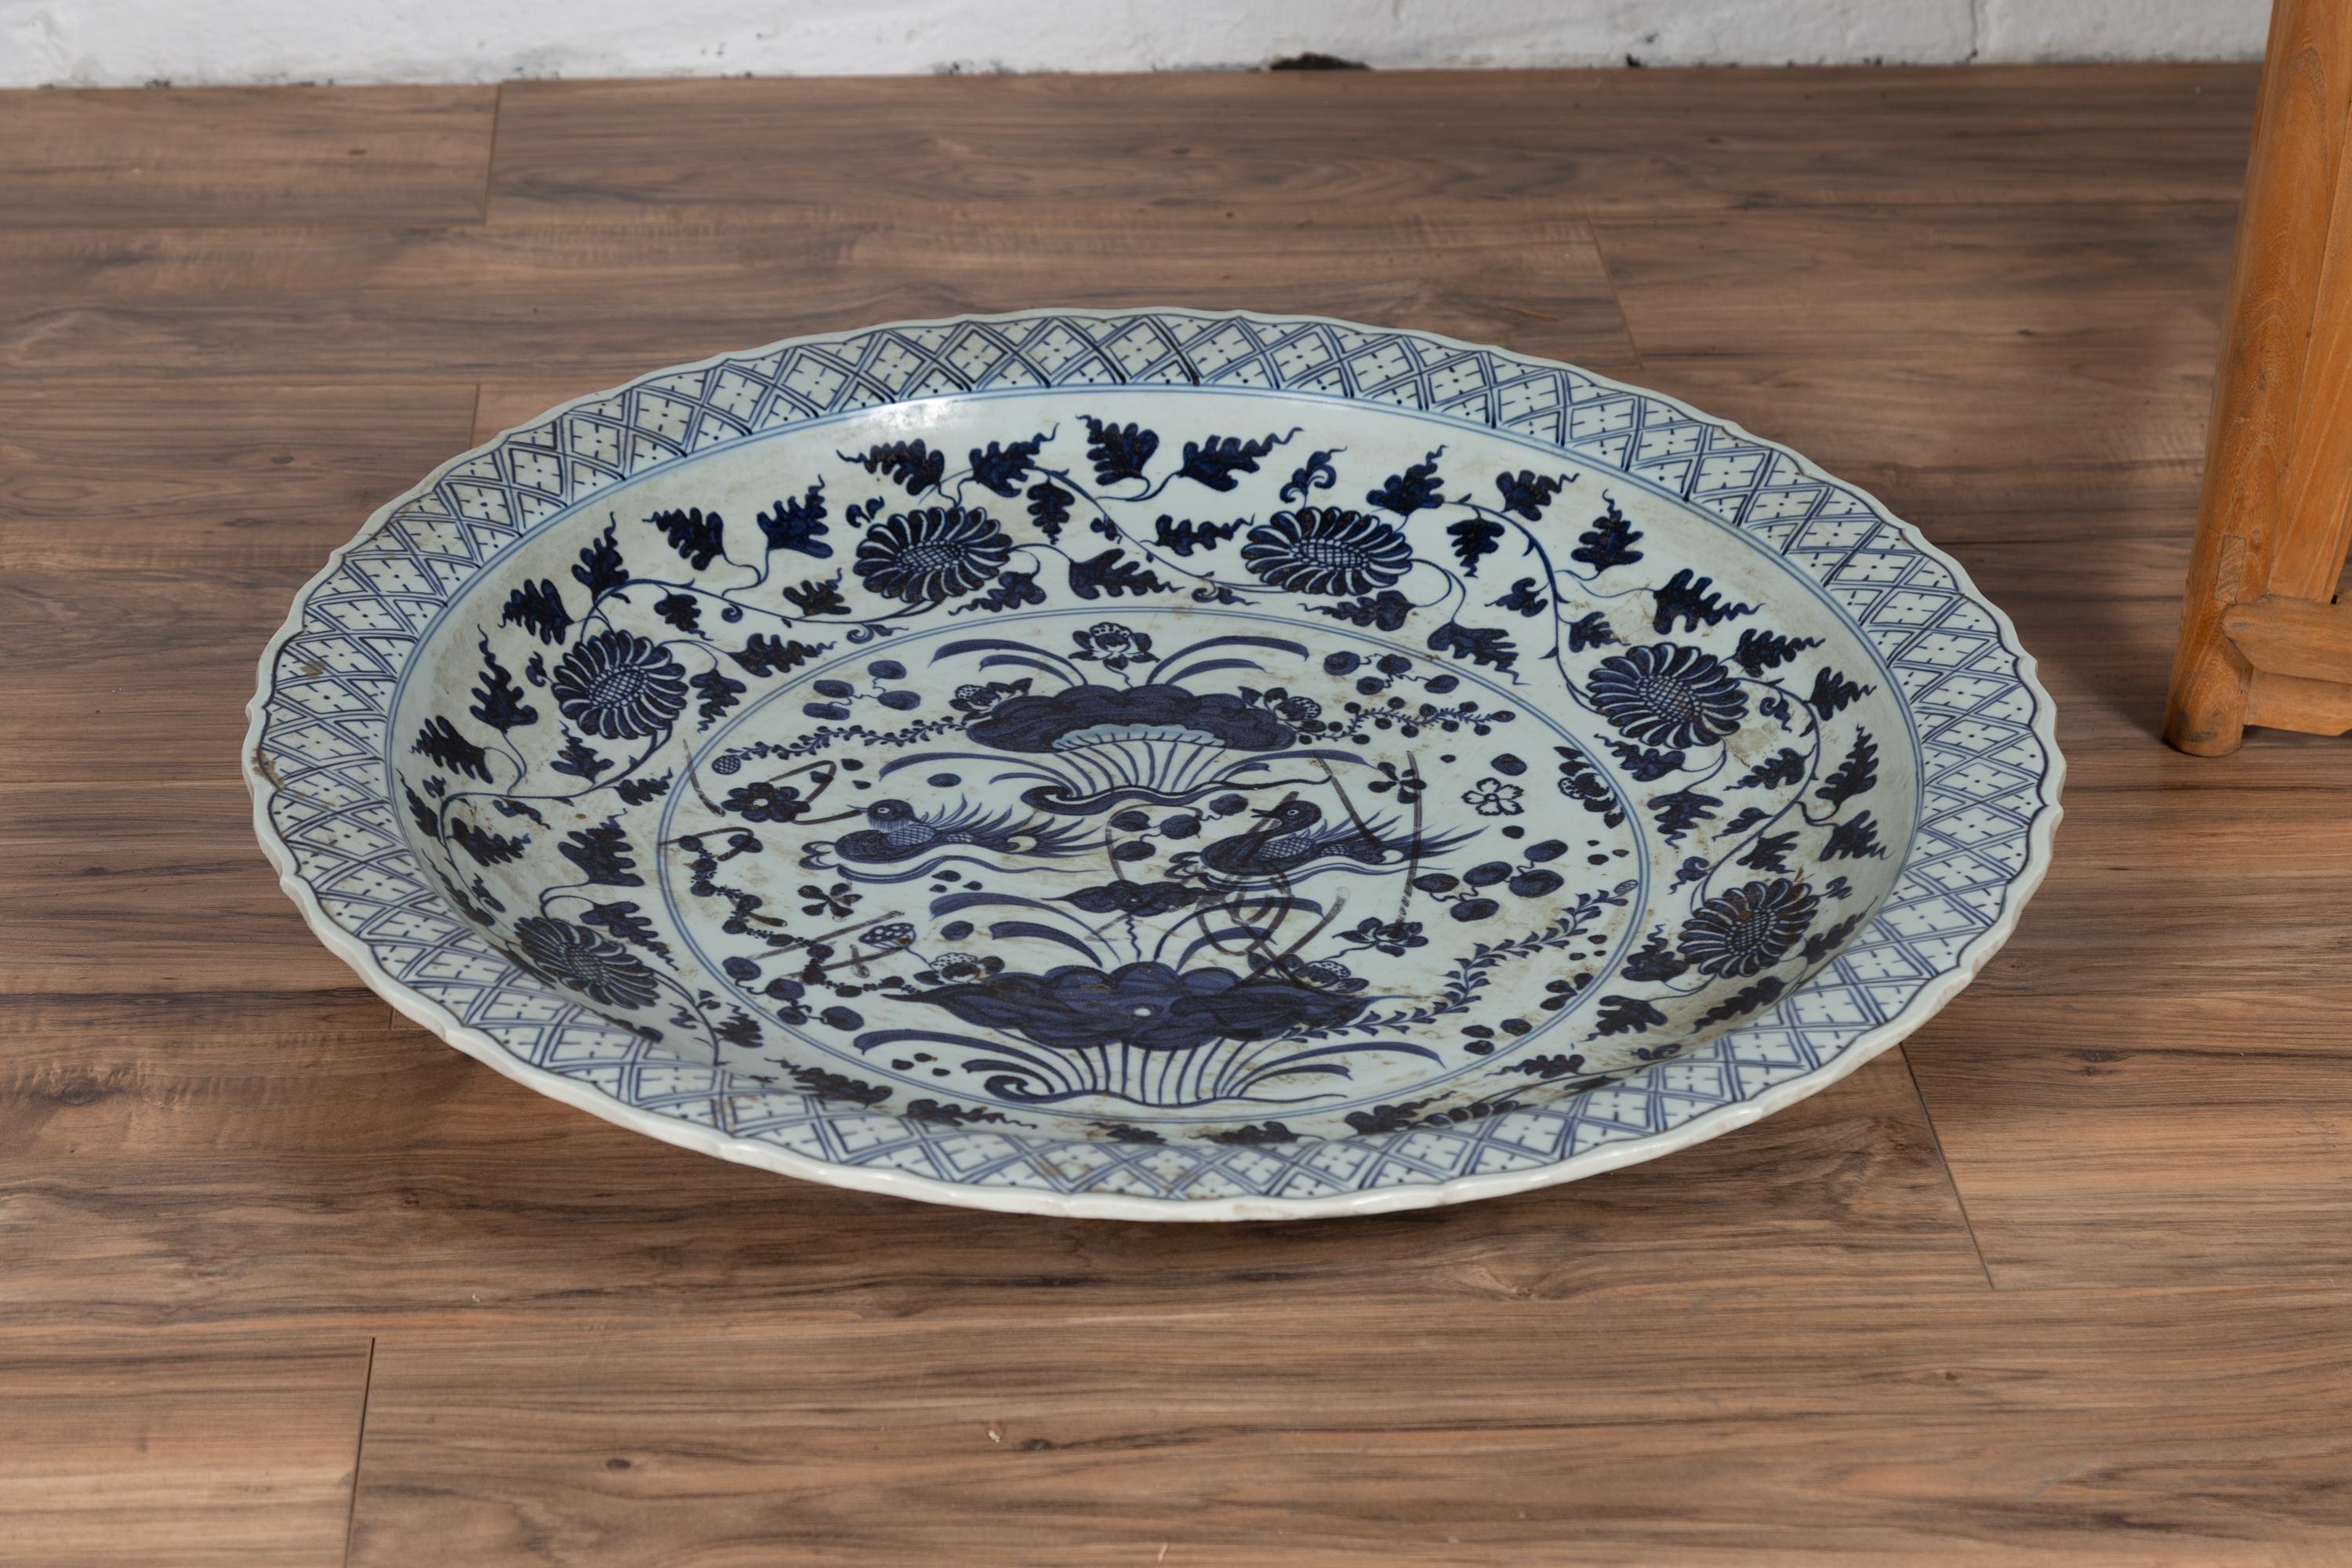 Large Chinese Vintage Blue and White Charger Plate with Flower and Bird Motifs 5